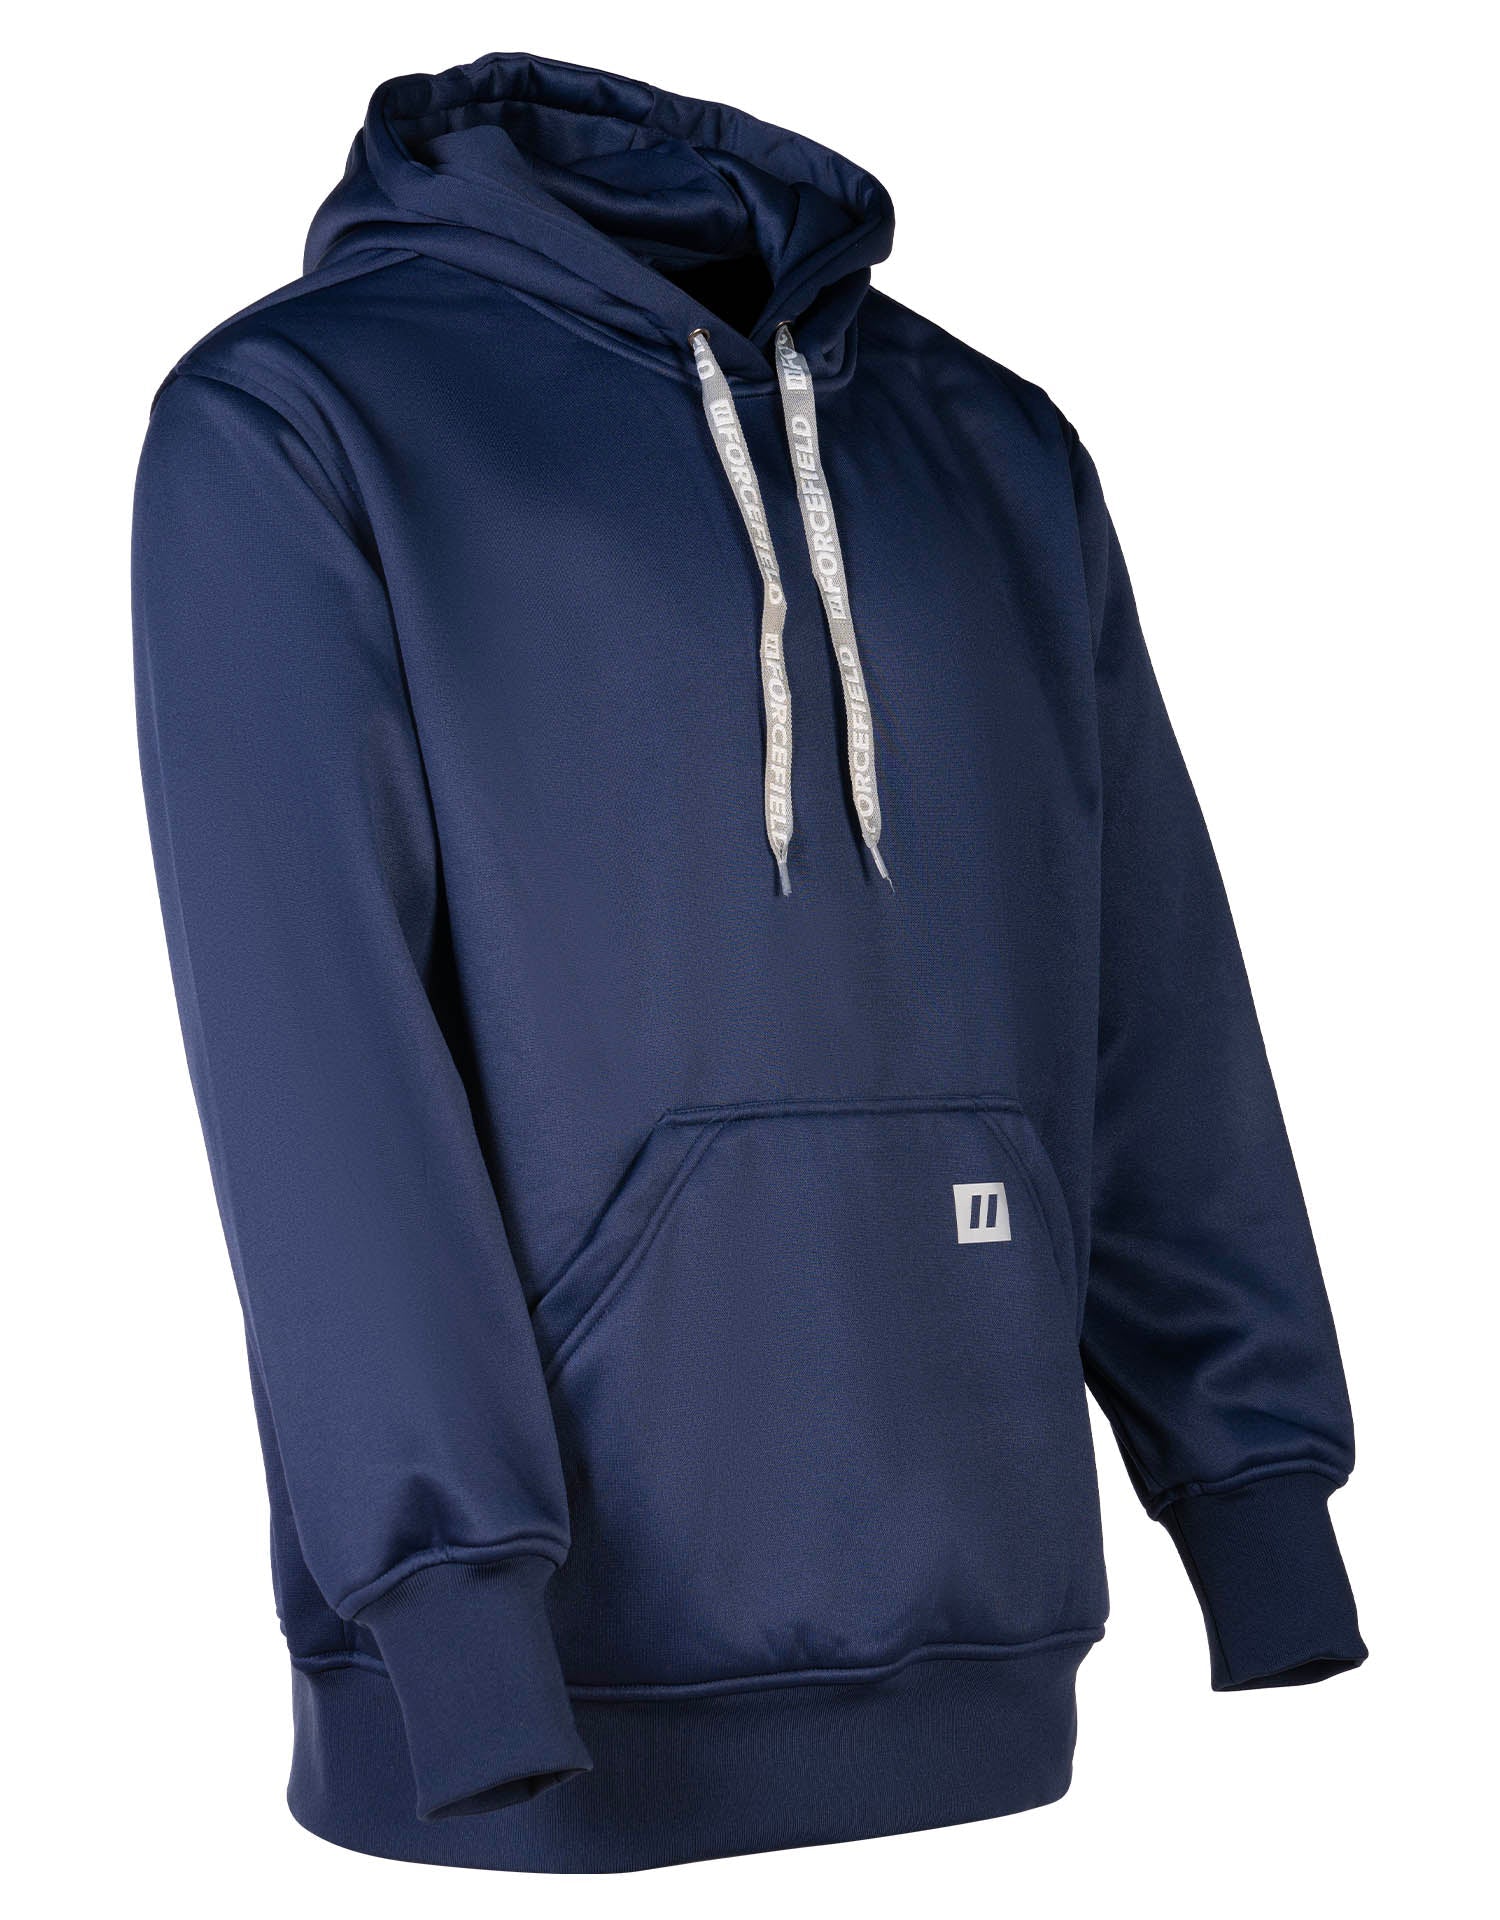 Premium Polyester Fleece Pullover Hoodie with Double-Lined Hood